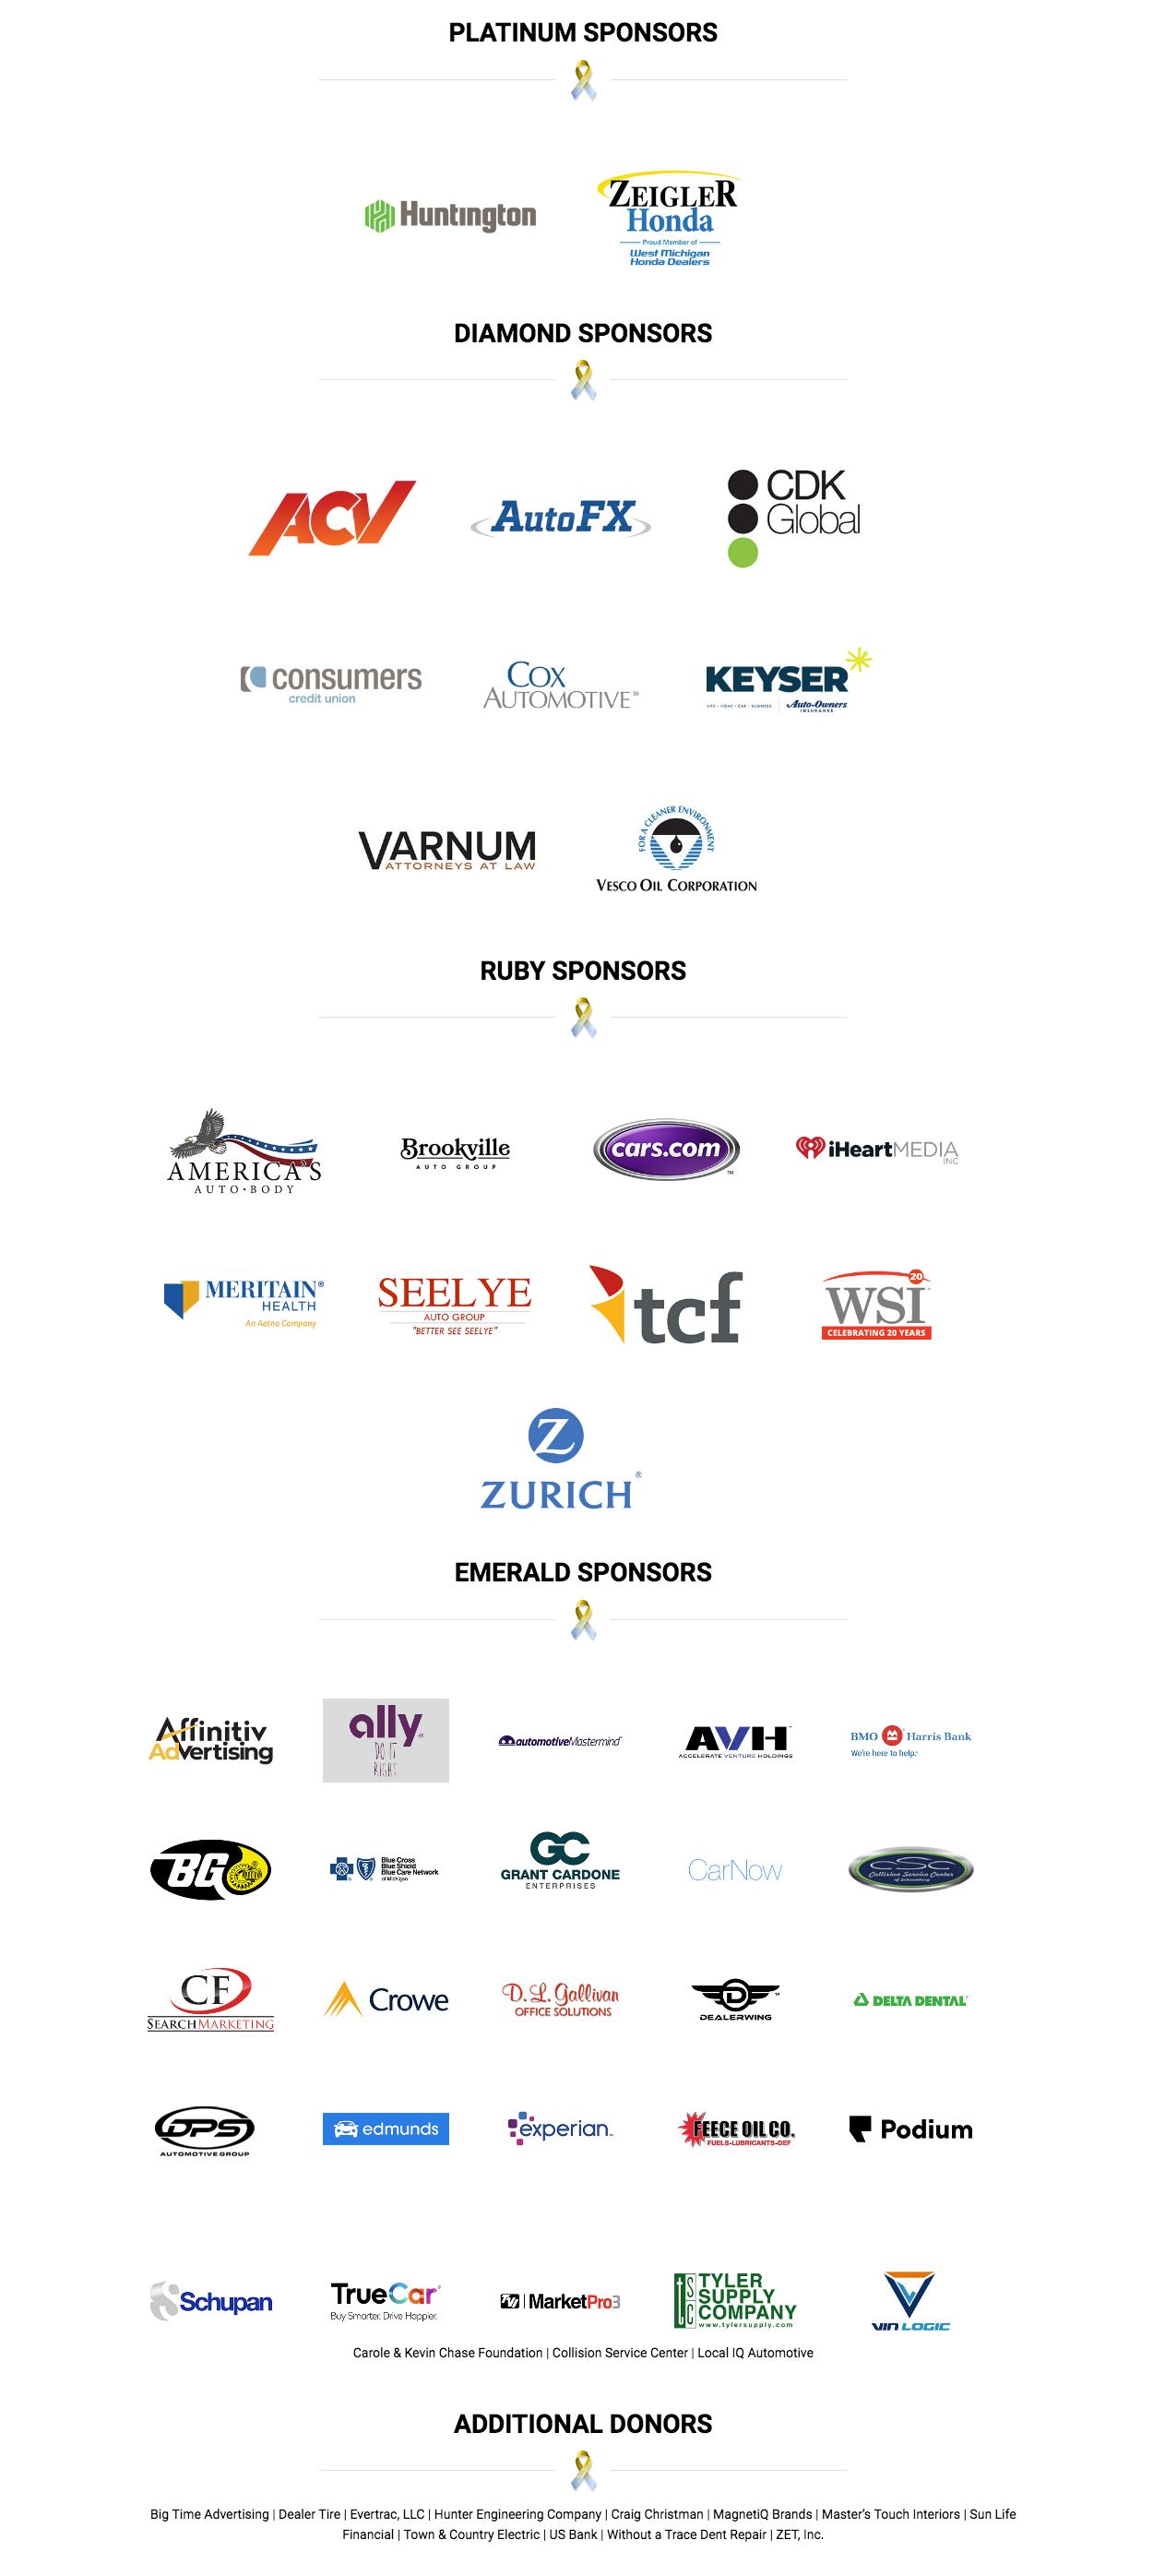 Platinum, Diamond, Ruby and Emerald Sponsors, and Additional Donors for the 39th Annual Drive for Life Charity Gala